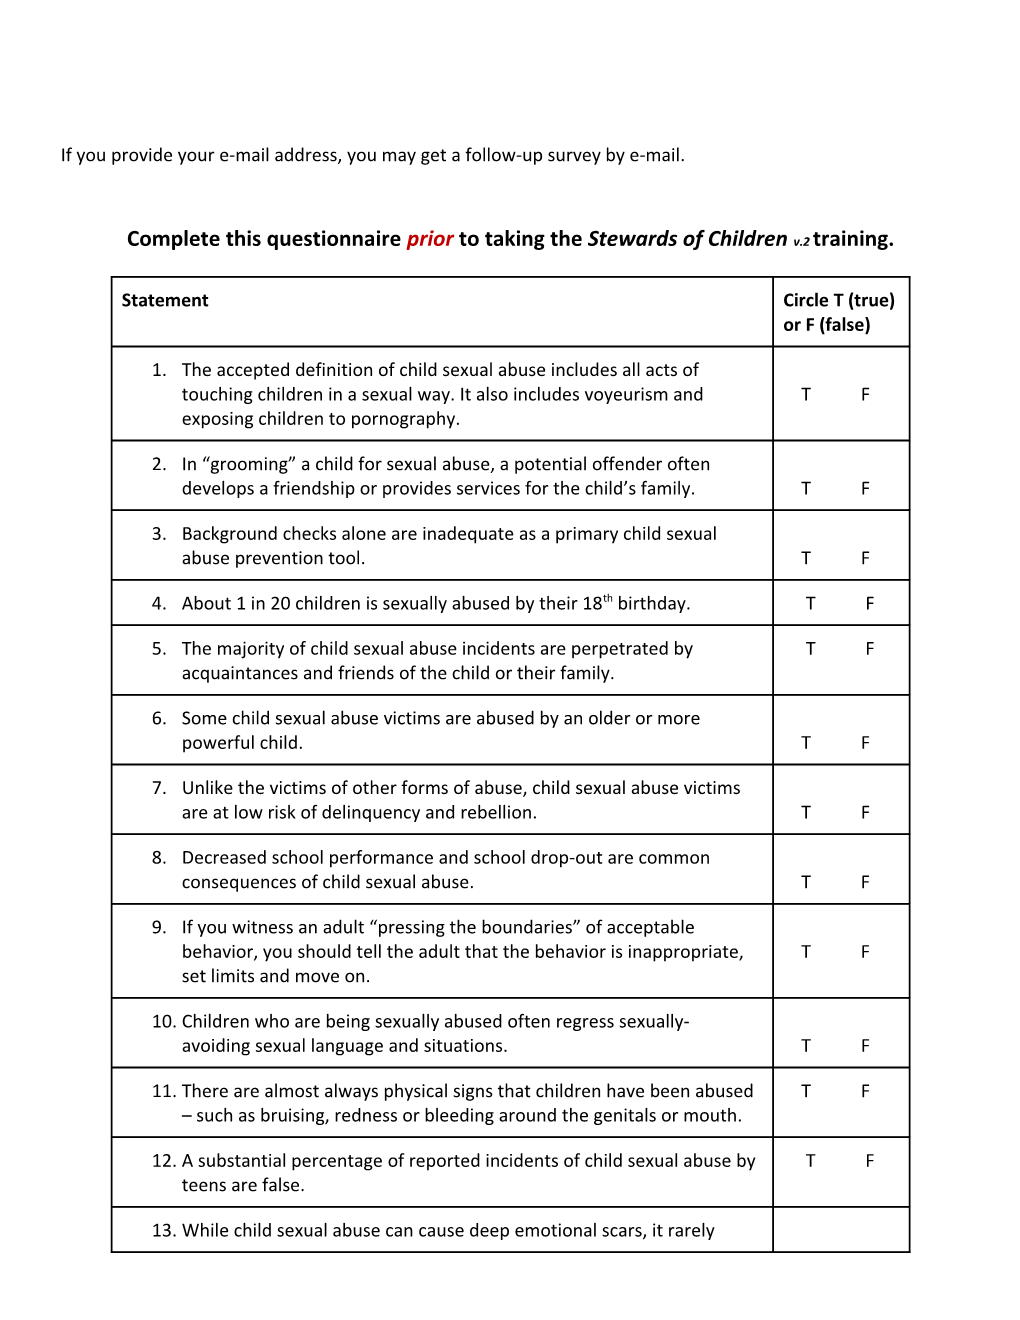 Complete This Questionnaire Prior to Taking the Stewards of Childrenv.2Training